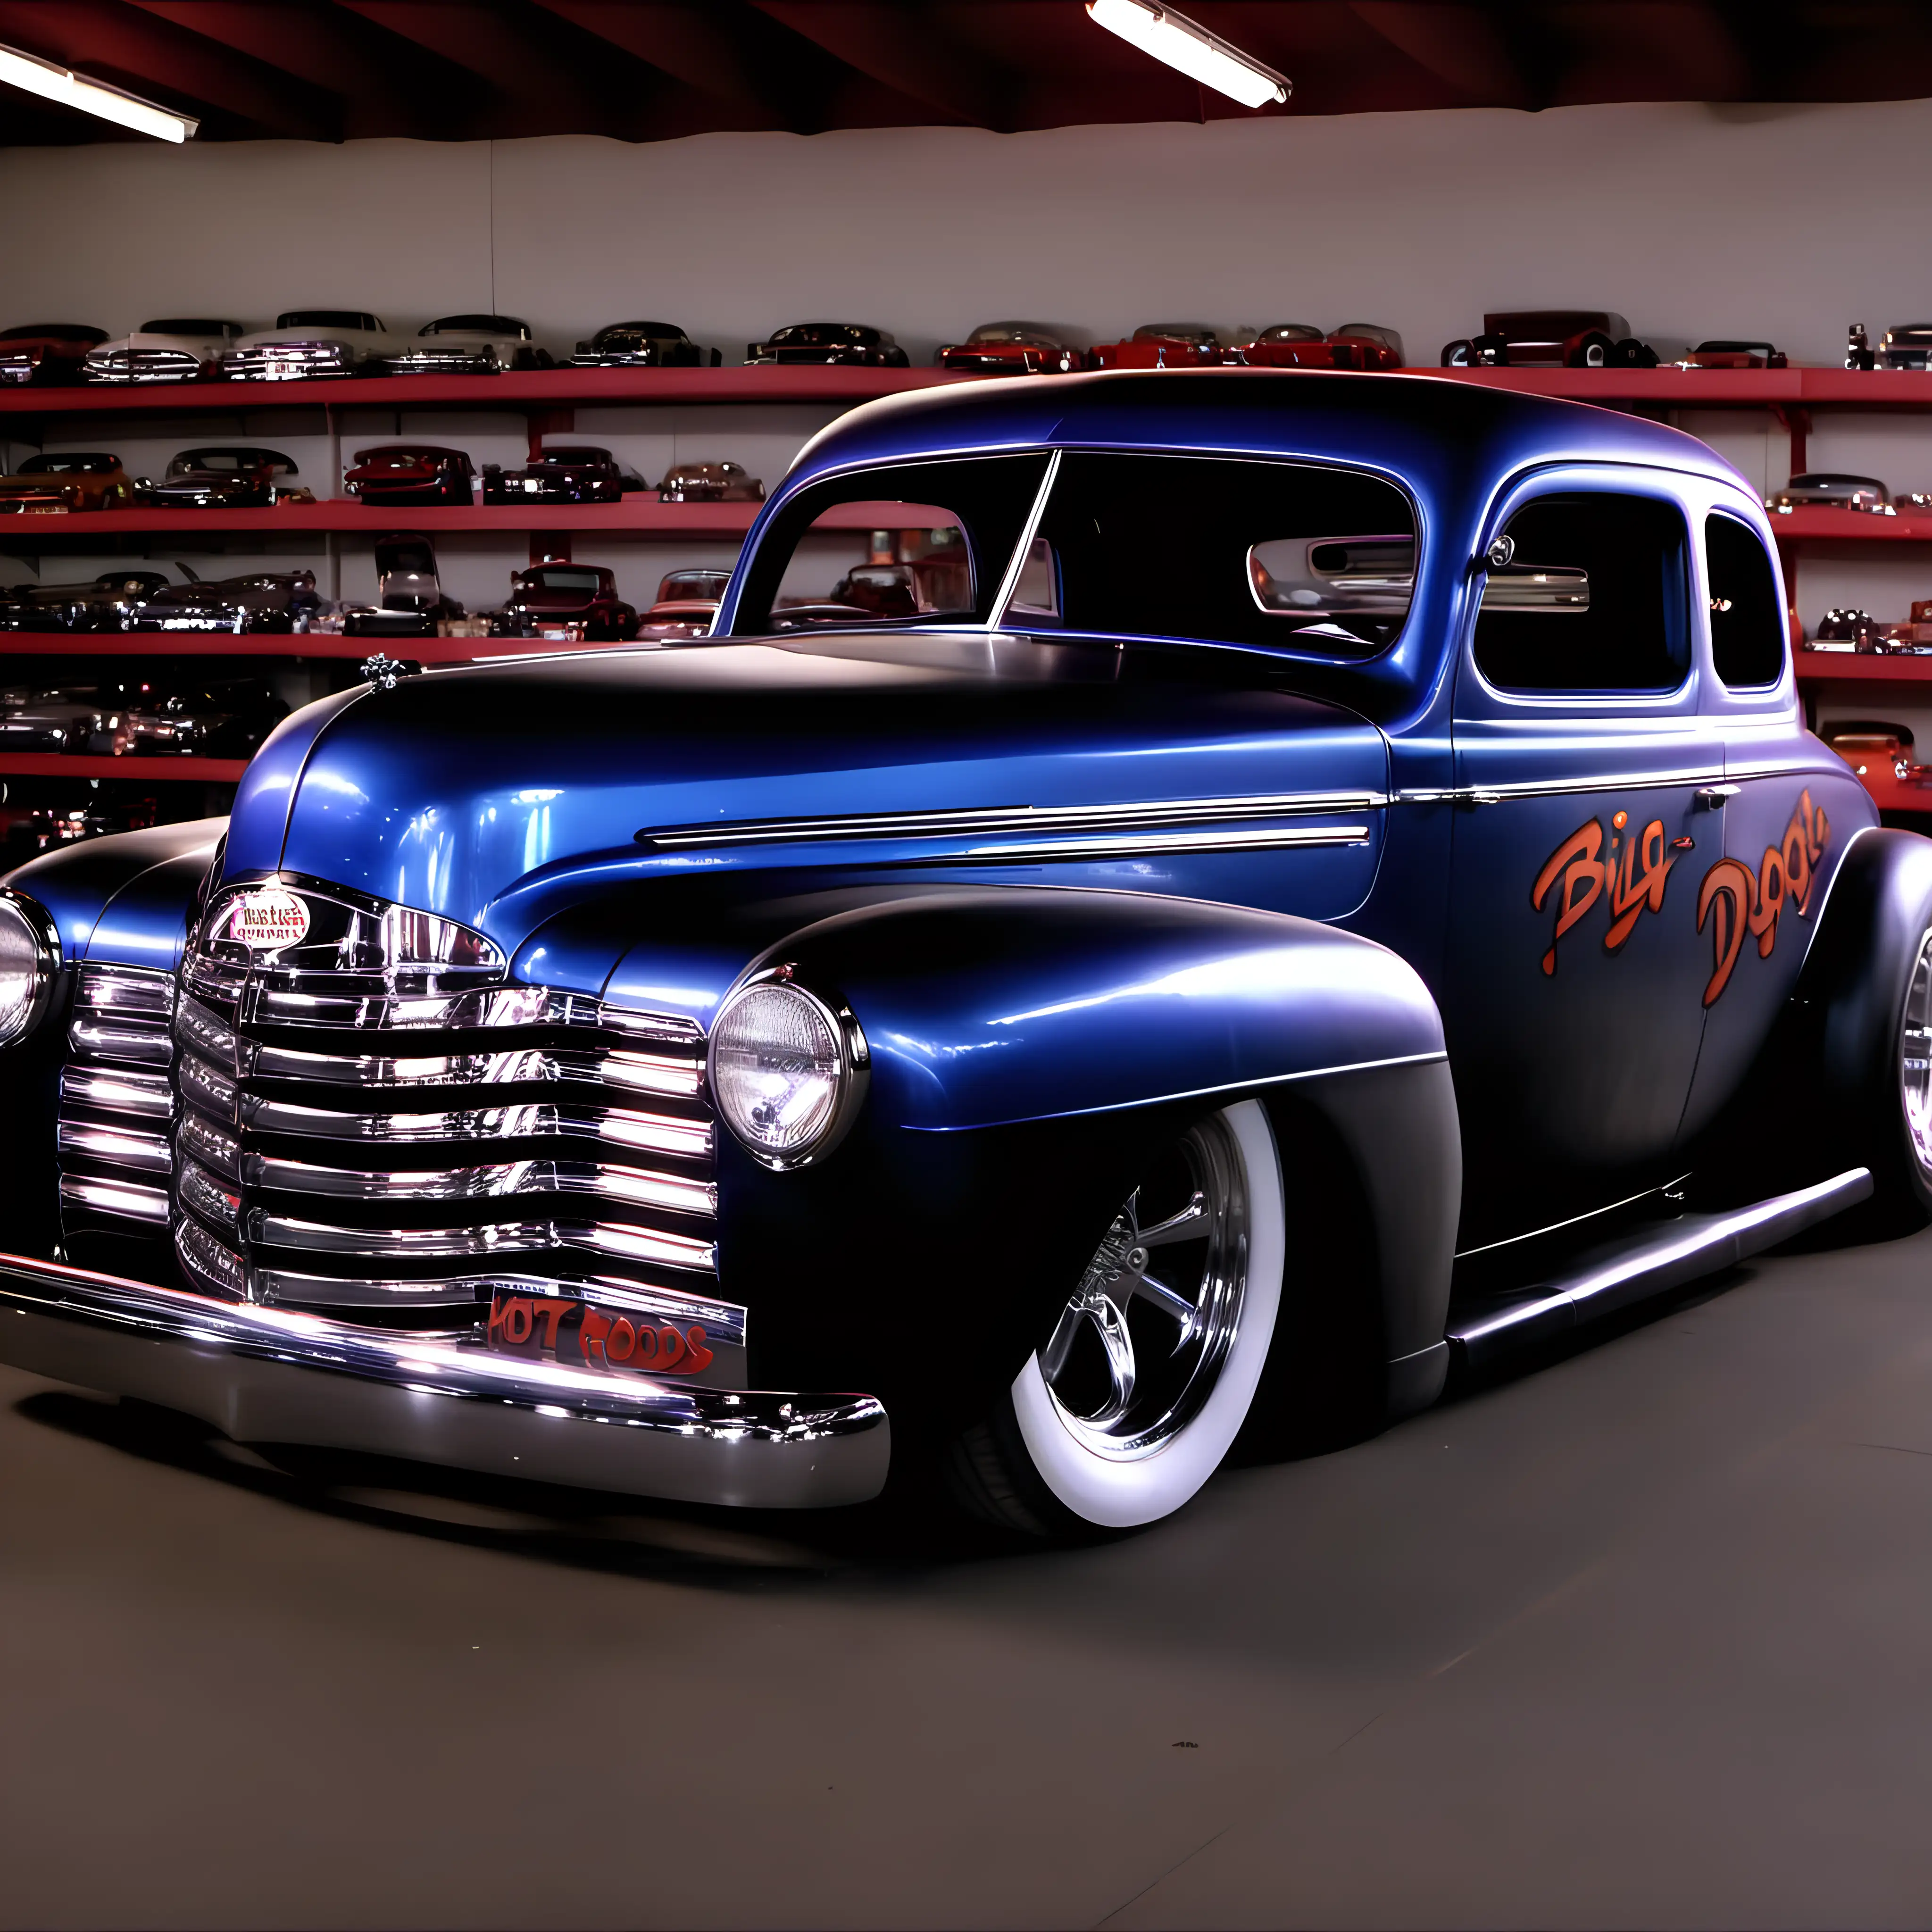 Big Dogg's House of Hot Rods, 16K Full HD  in color.







